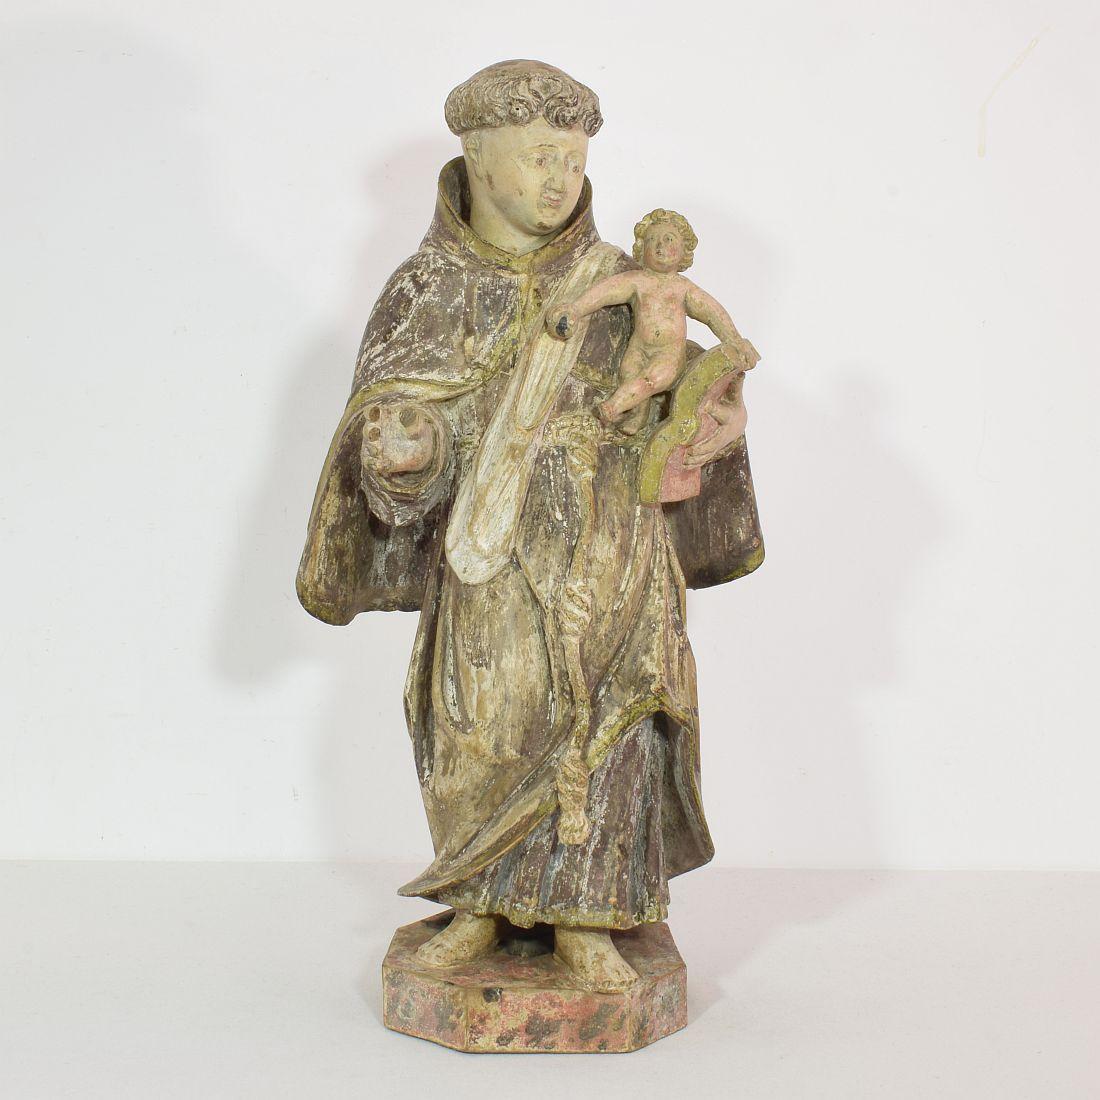 Hand-Carved 18th Century Portuguese Carved Wooden Statue of Saint Anthony